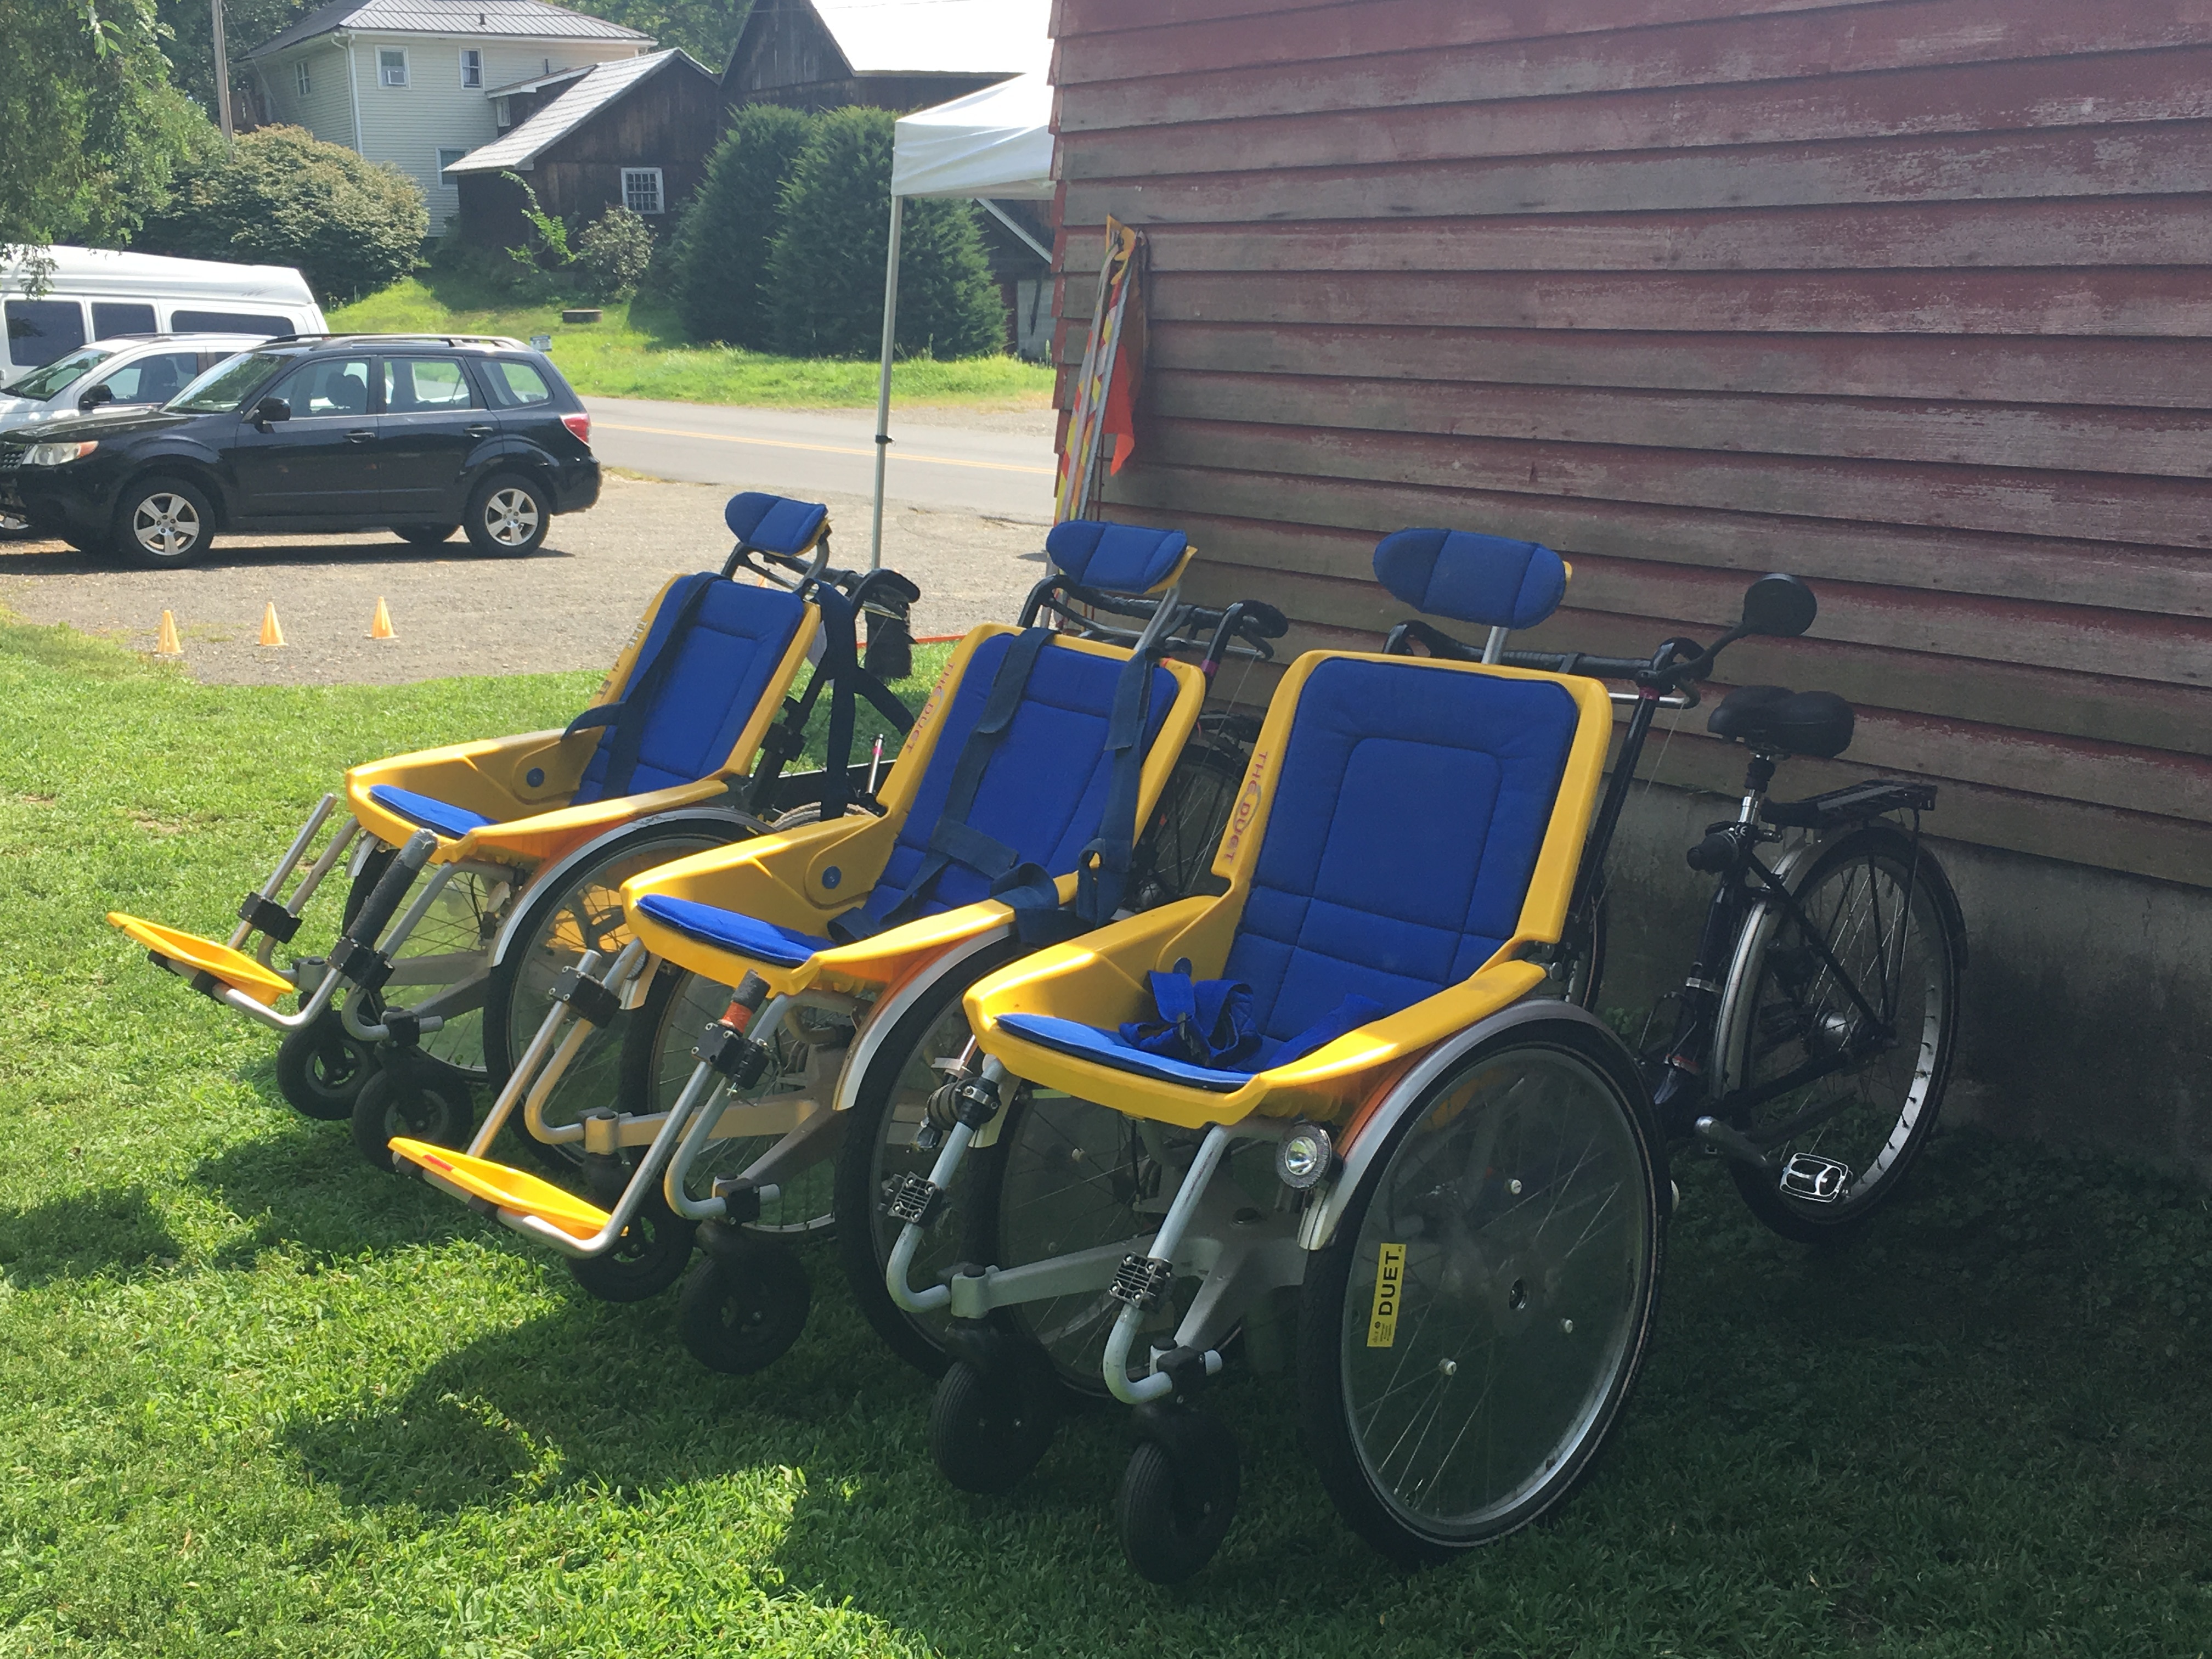 Three Frank Mobility Duet Wheelchair Tandem Bikes lined up next to a brick building